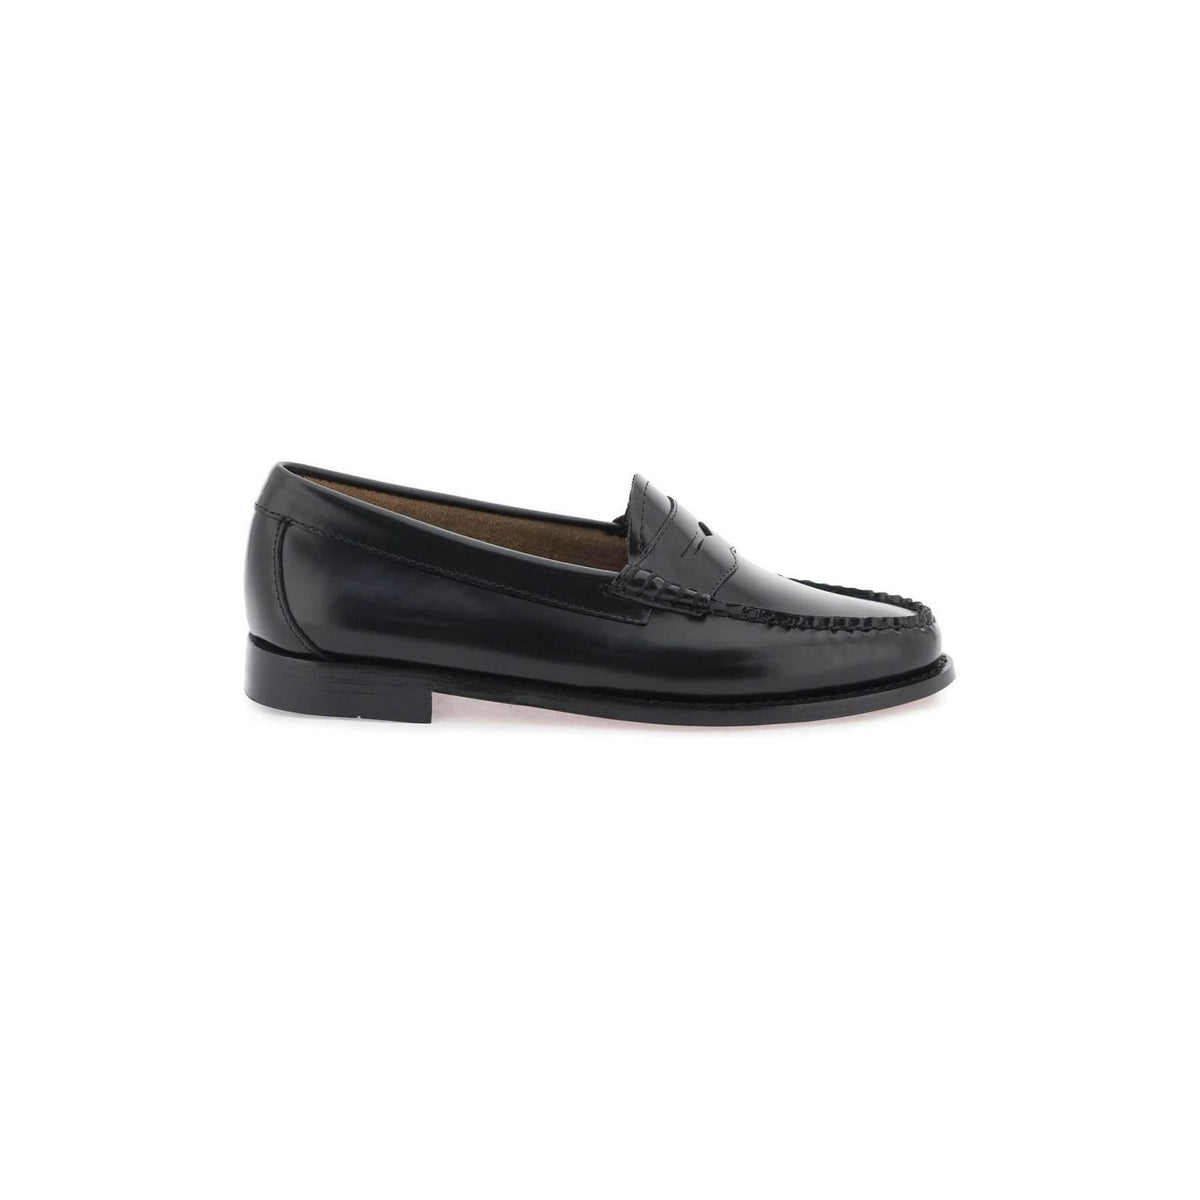 Black Handcrafted Leather Weejuns Penny Loafers G.H. BASS JOHN JULIA.